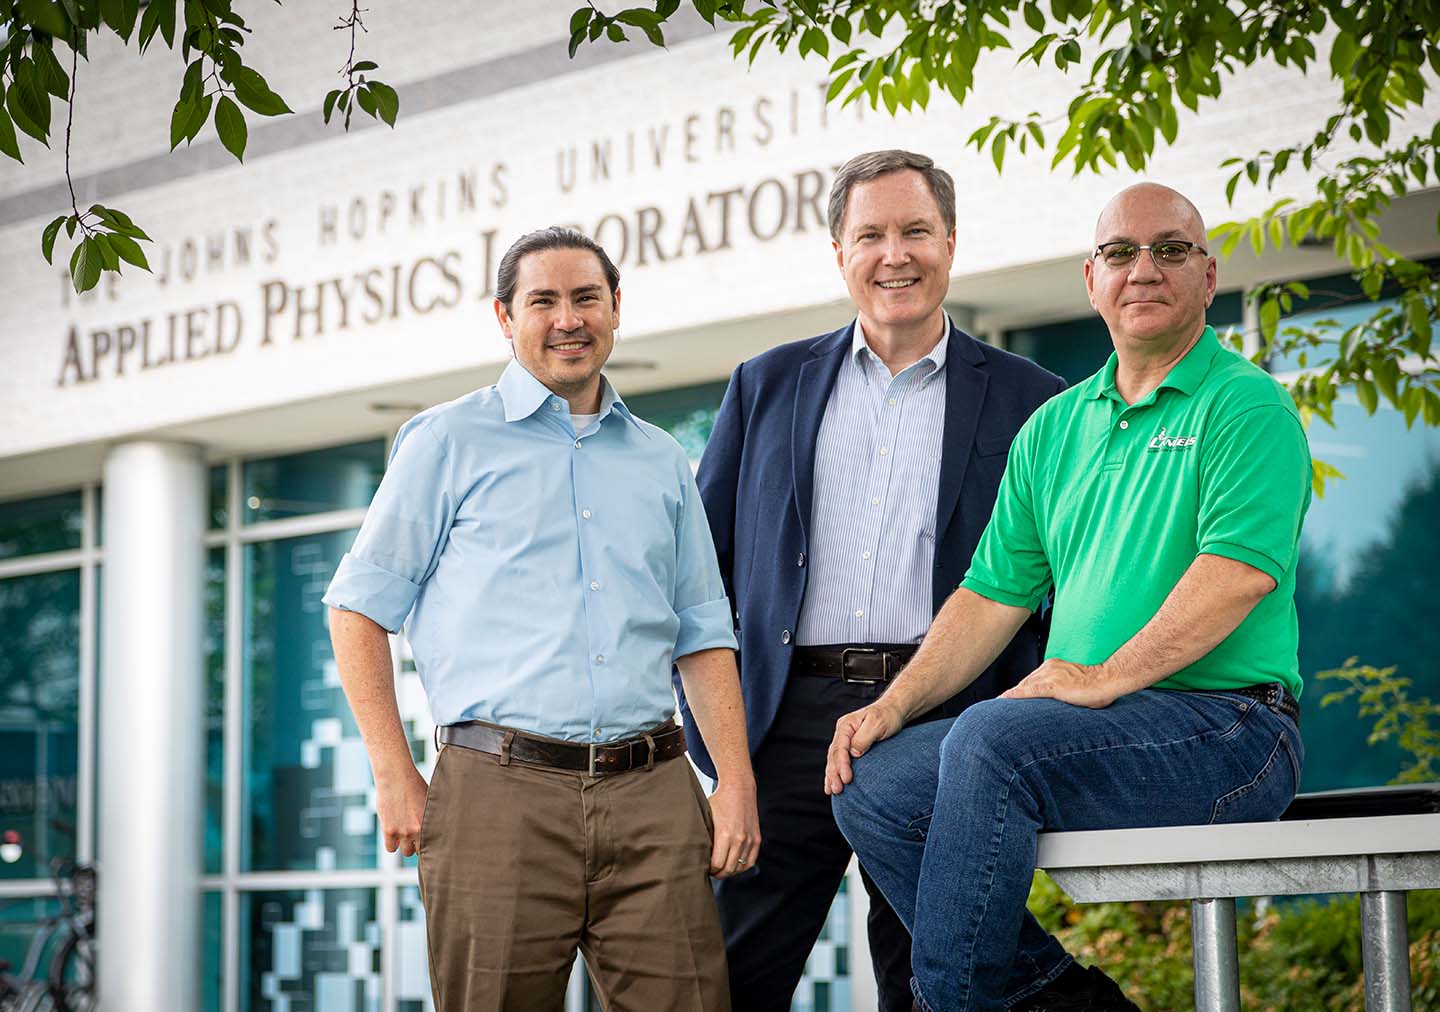 From left, Ariel Greenberg, Hans Mair and Mark Gabriele